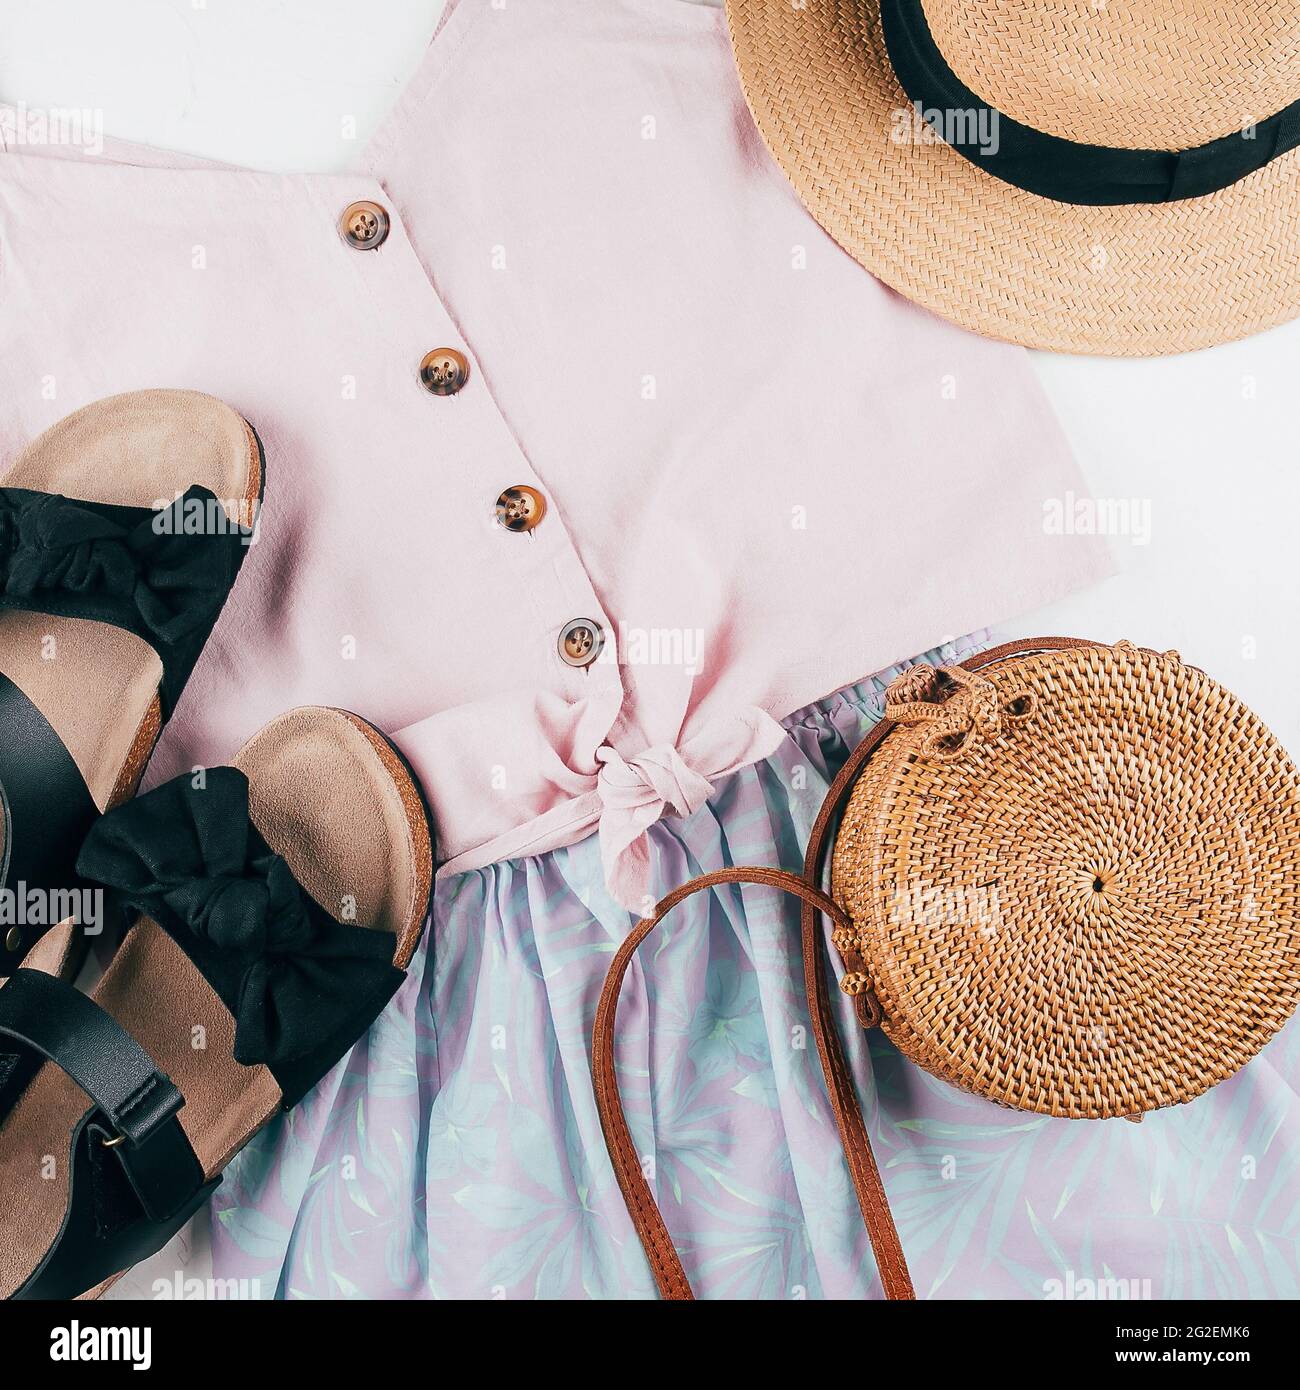 Summer holiday clothes. Female fashion outfit - skirt, top, hat, bag, sandals. Top view, flat lay Stock Photo